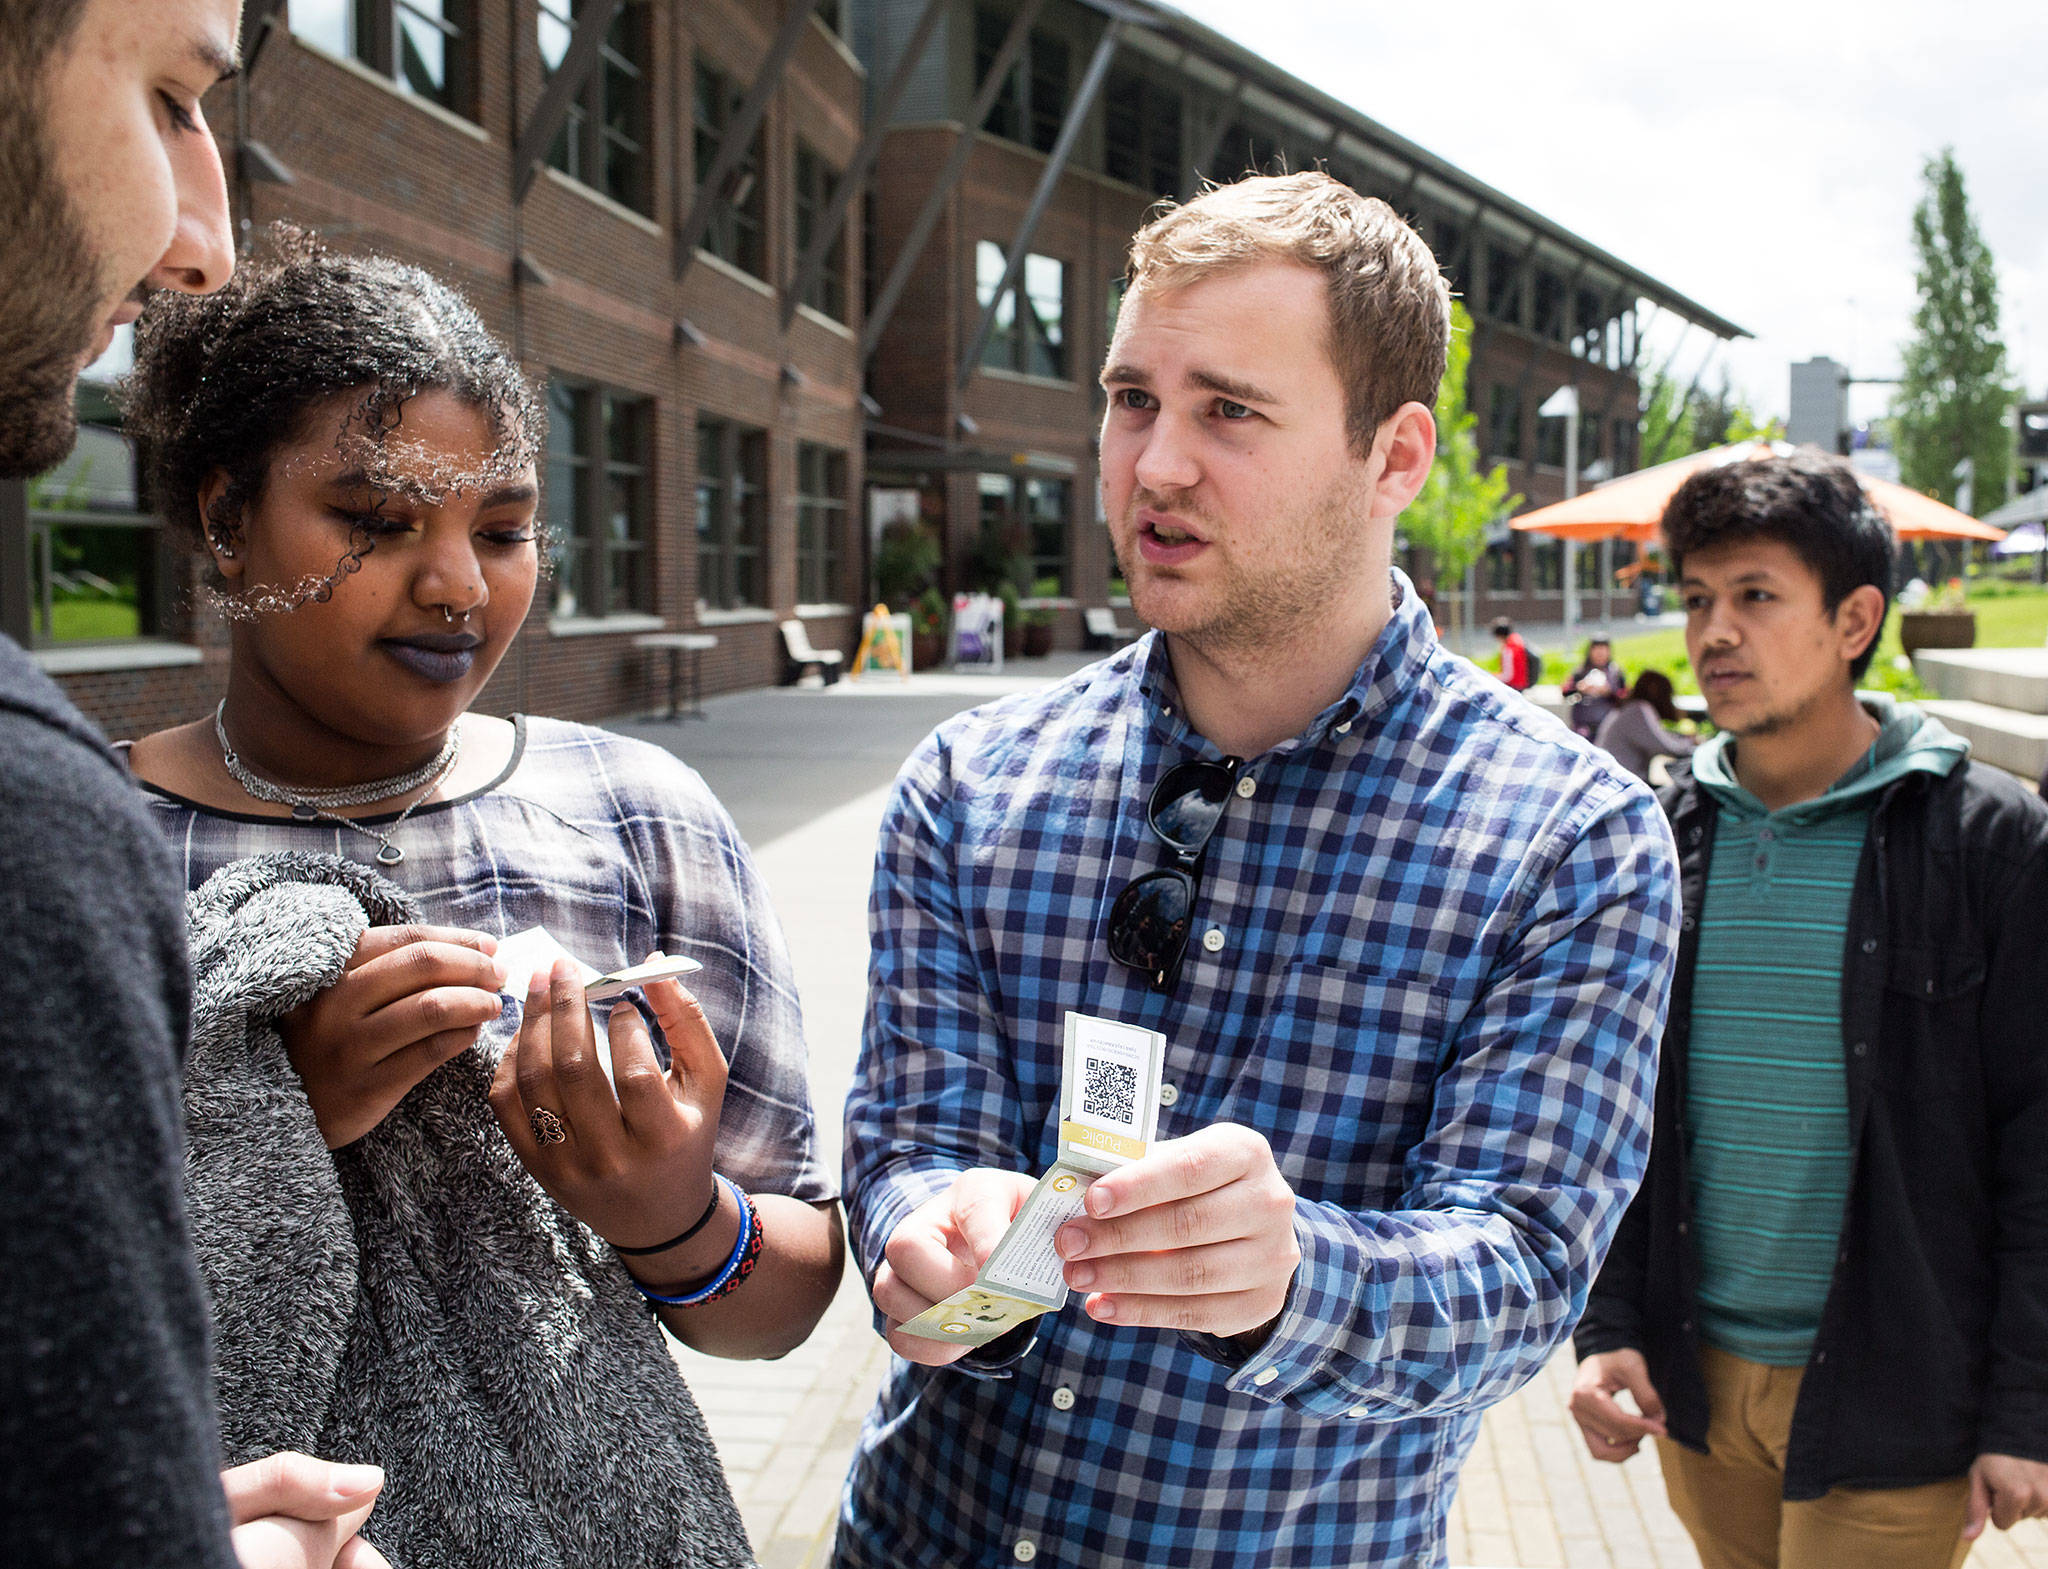 Cryptocurrency and Blockchain Club president Zach Nelson explains to a pair of students how the currency works while handing out free cryptocurrency at the University of Washington Bothell on Wednesday, May 9, 2018 in Everett, Wa. (Andy Bronson / The Herald)